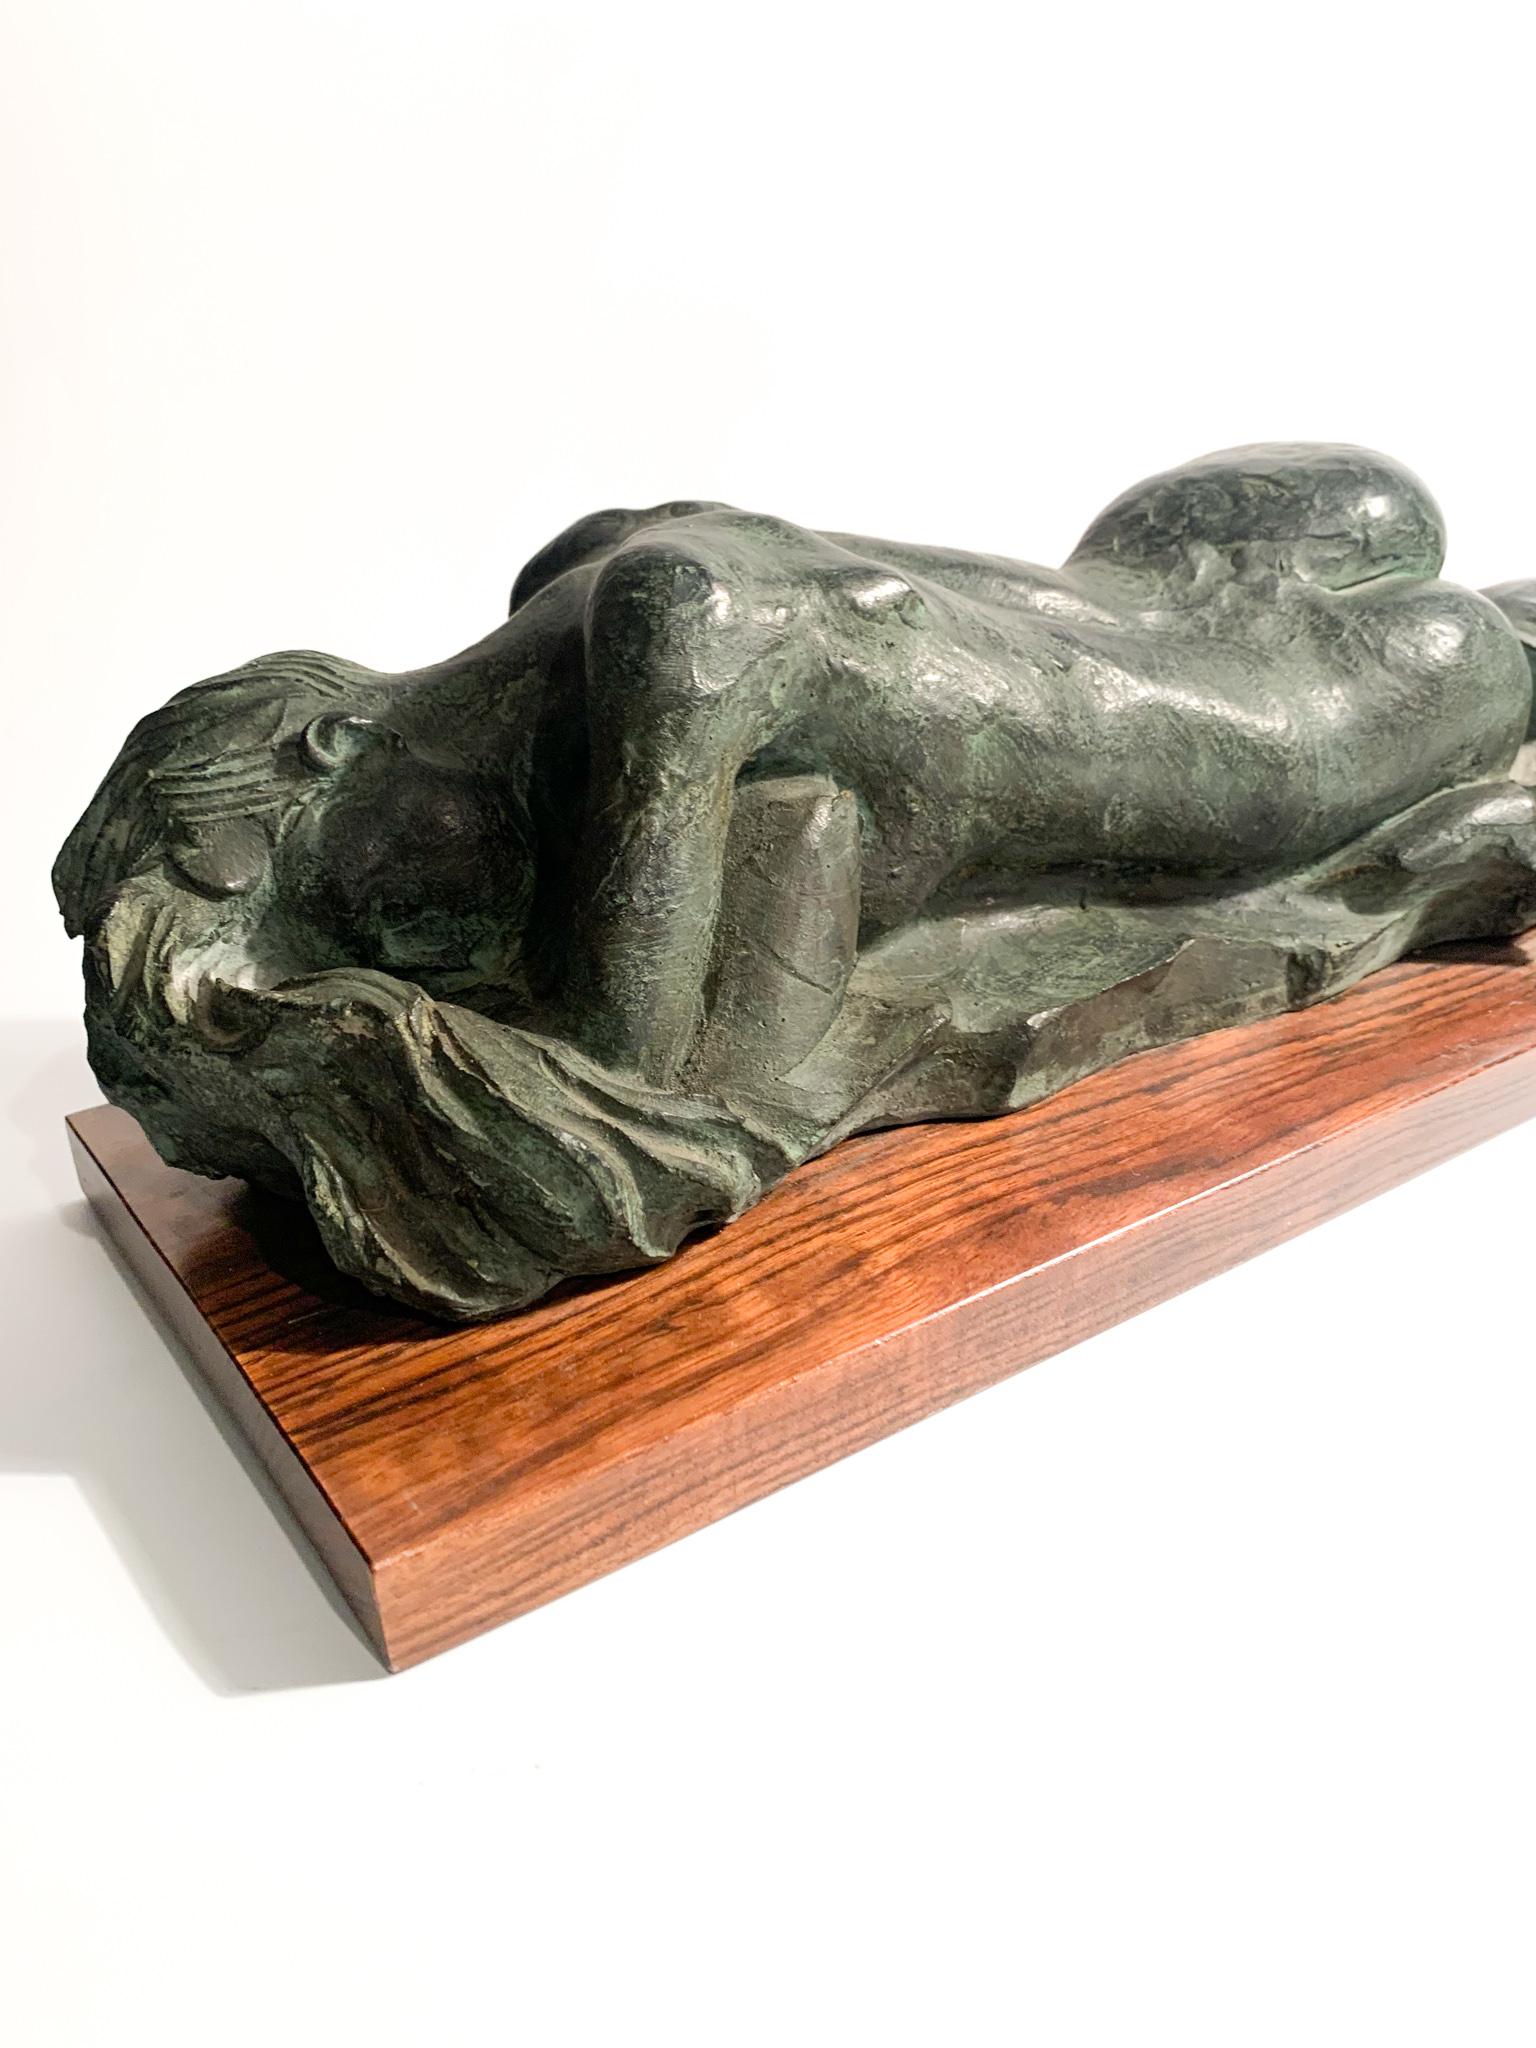 Bronze Sculpture of a Female Nude by Michele Zappino from the 1990s For Sale 1